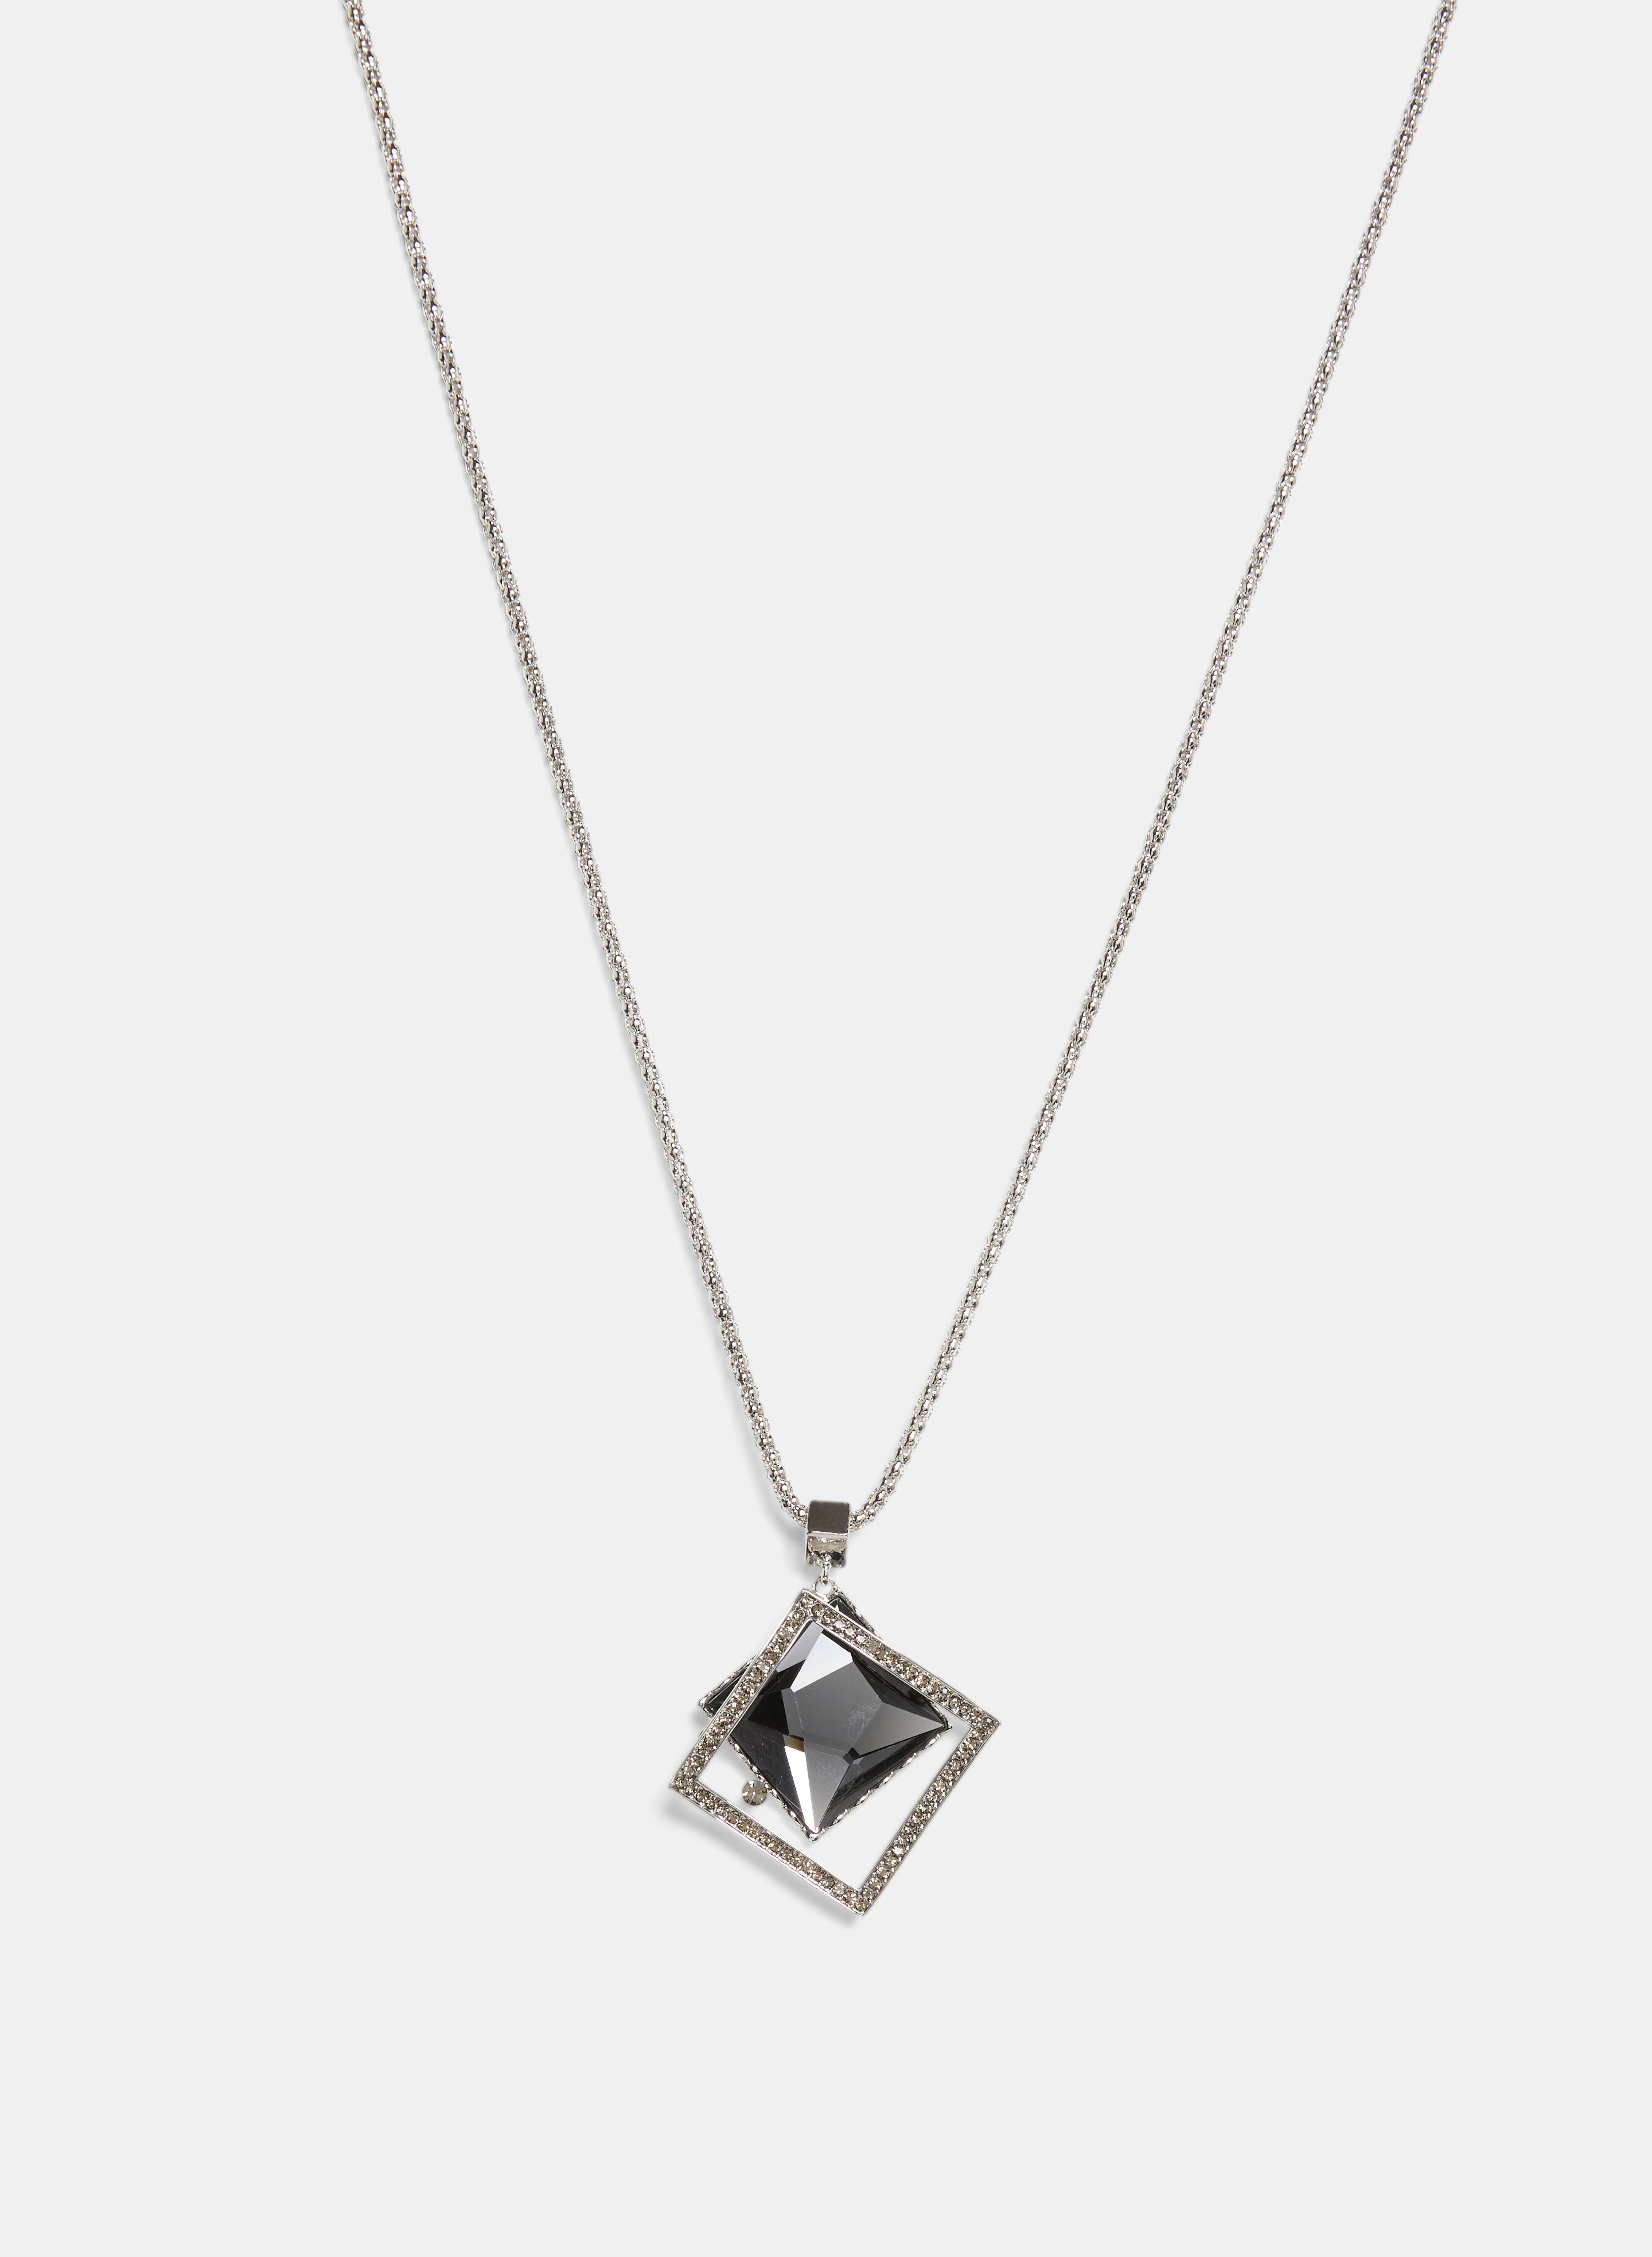 Framed Faceted Stone Pendant Necklace